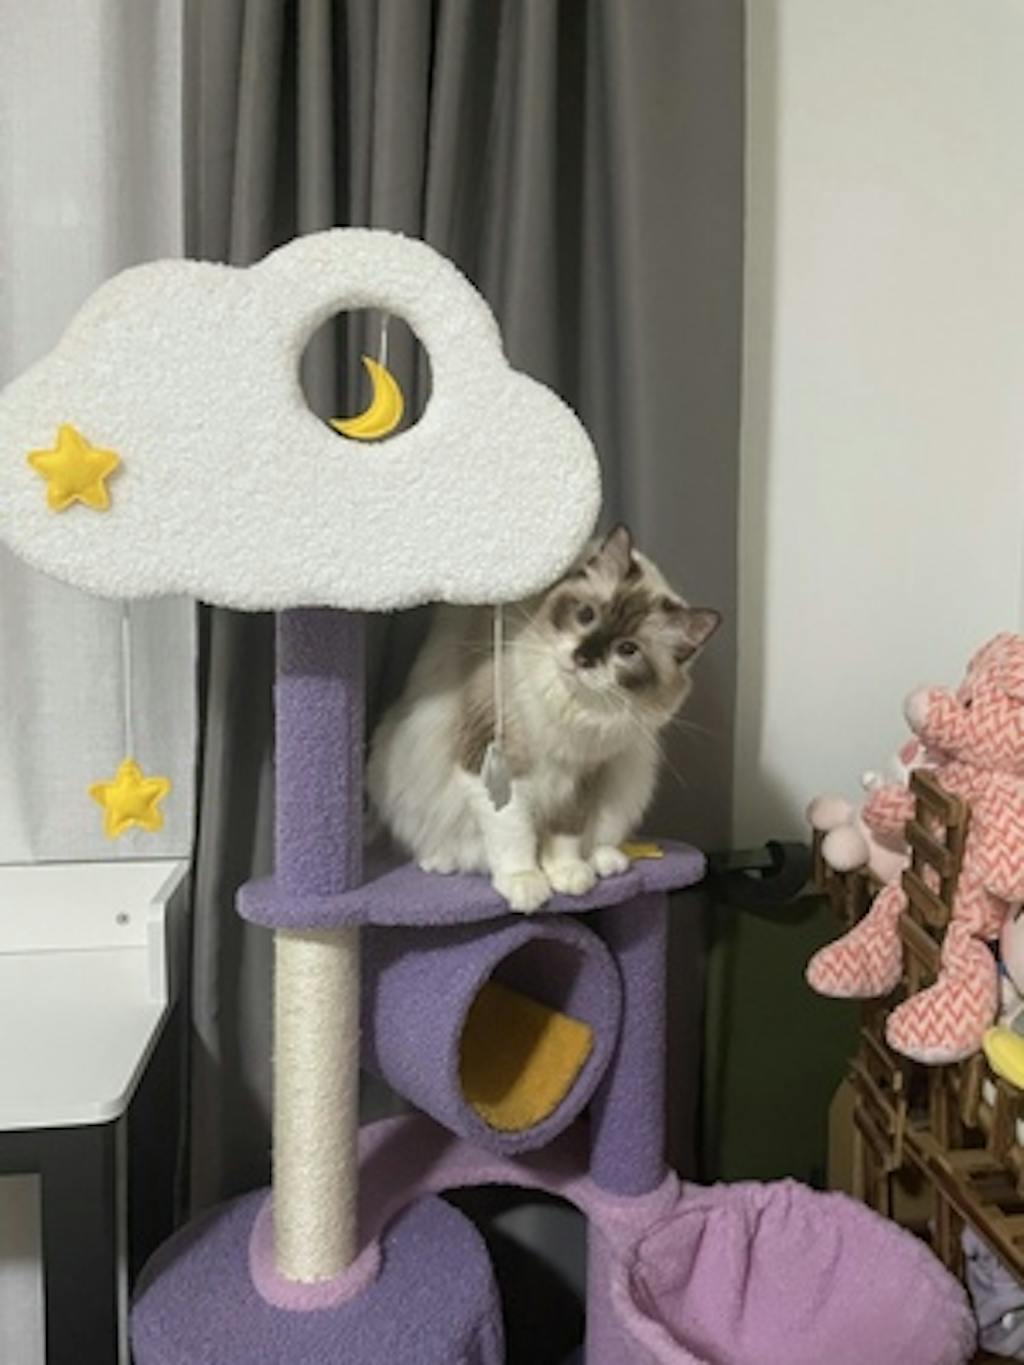 A cat tree customer review an actual picture of moonlight cat tree product